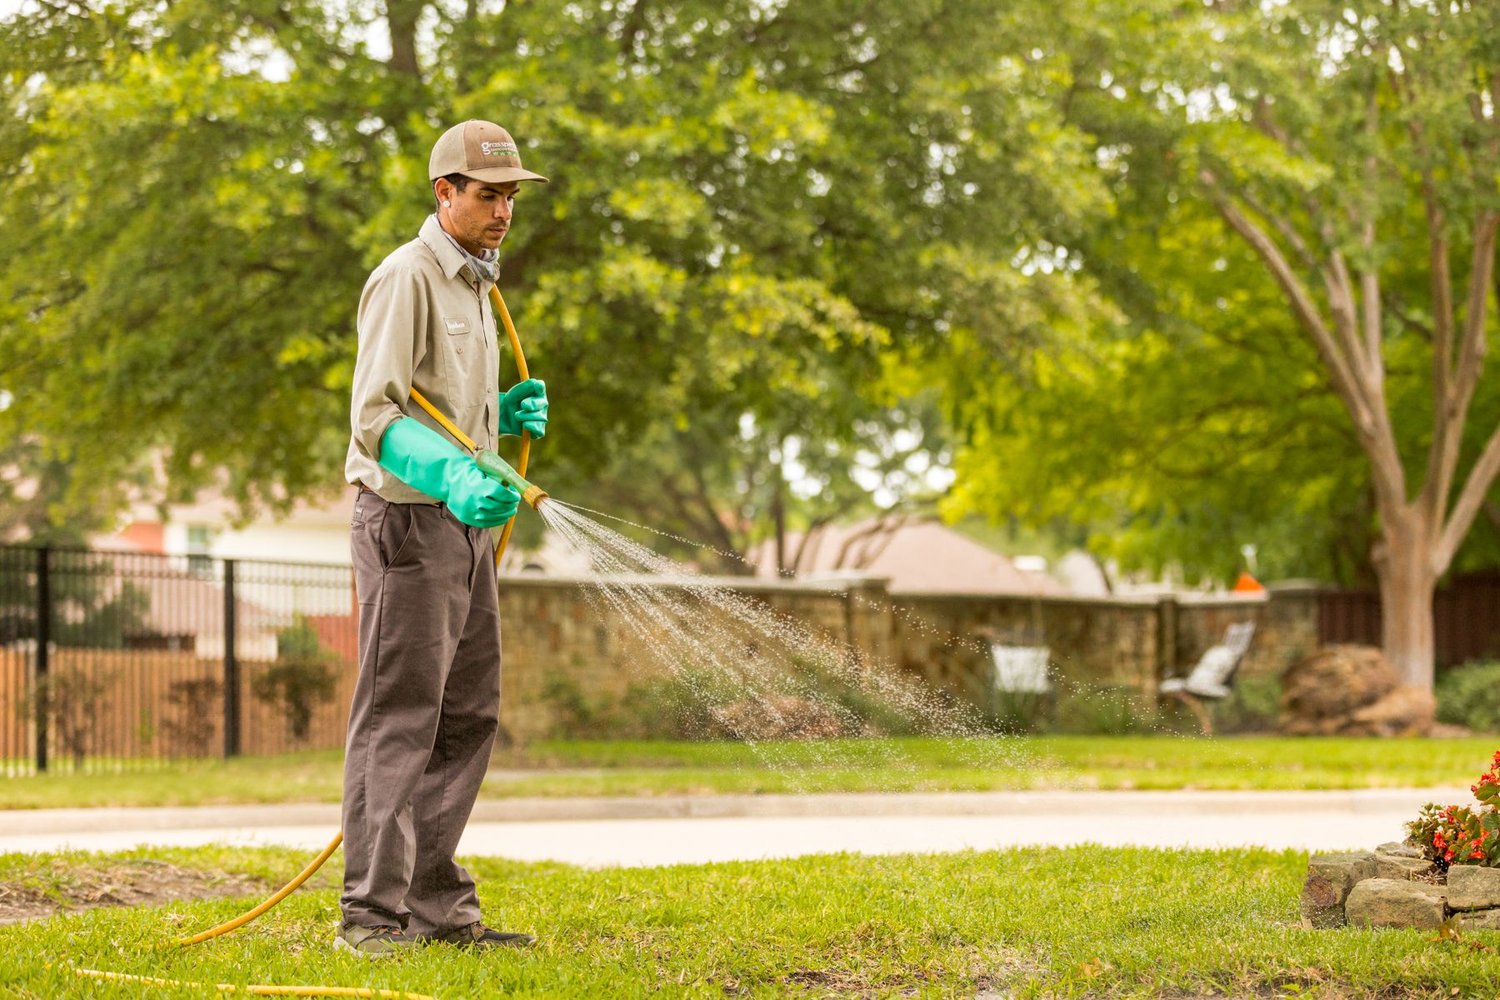 Perfect Lawn Maintenance Timing When To Fertilize Water Spray Weeds And More In Texas